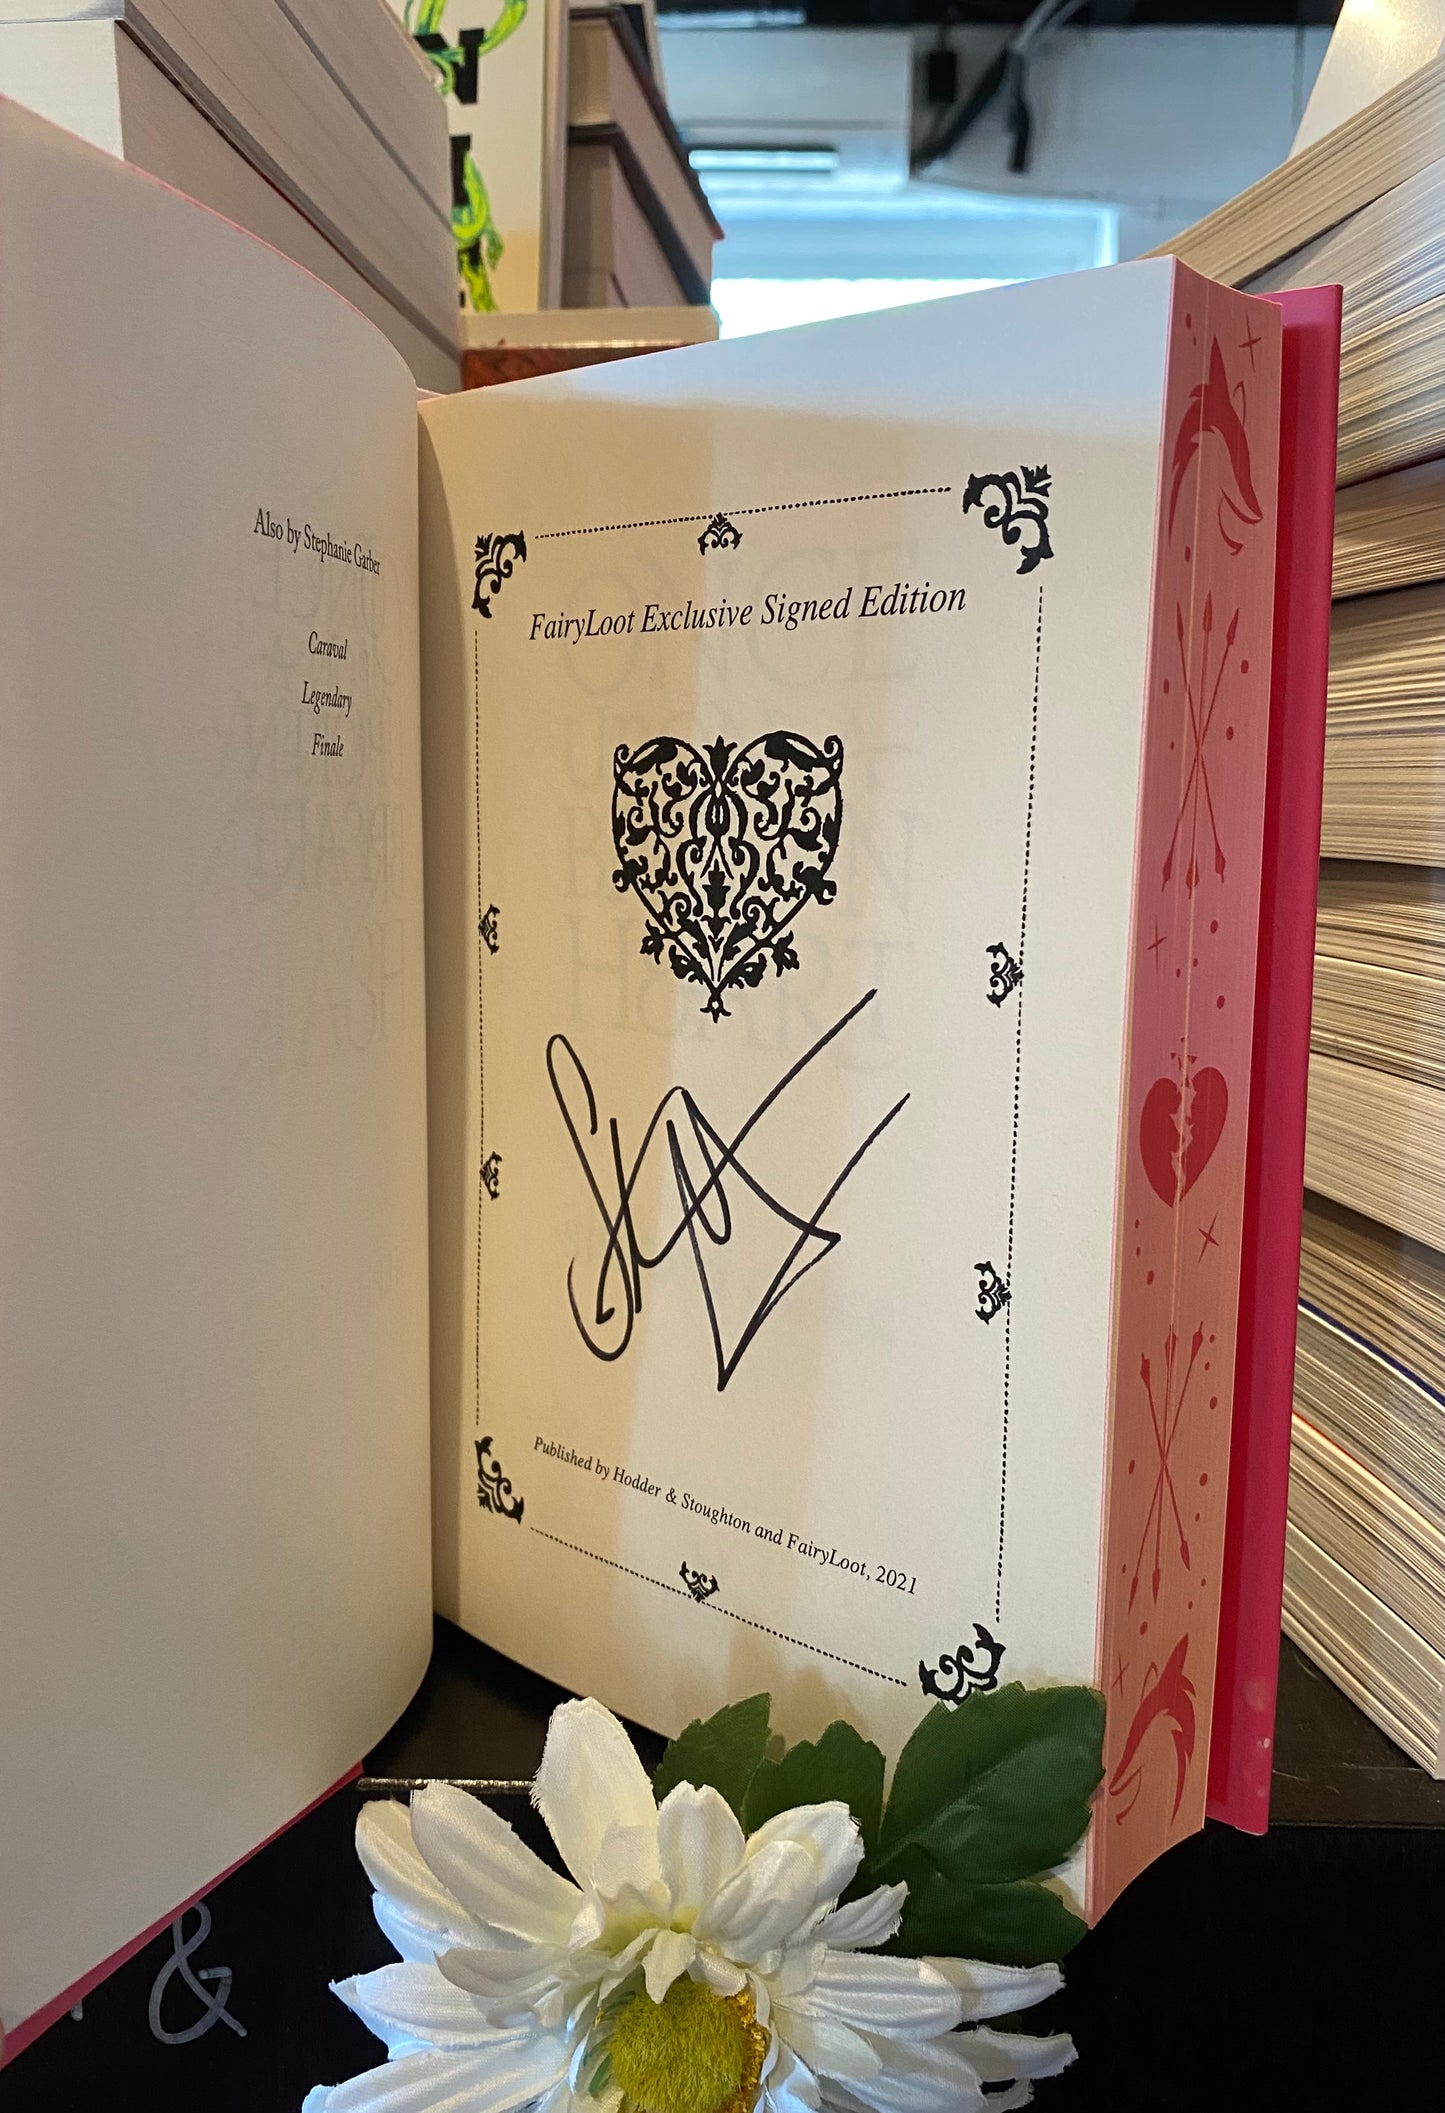 Once Upon a Broken Heart Signed Fairyloot Edition